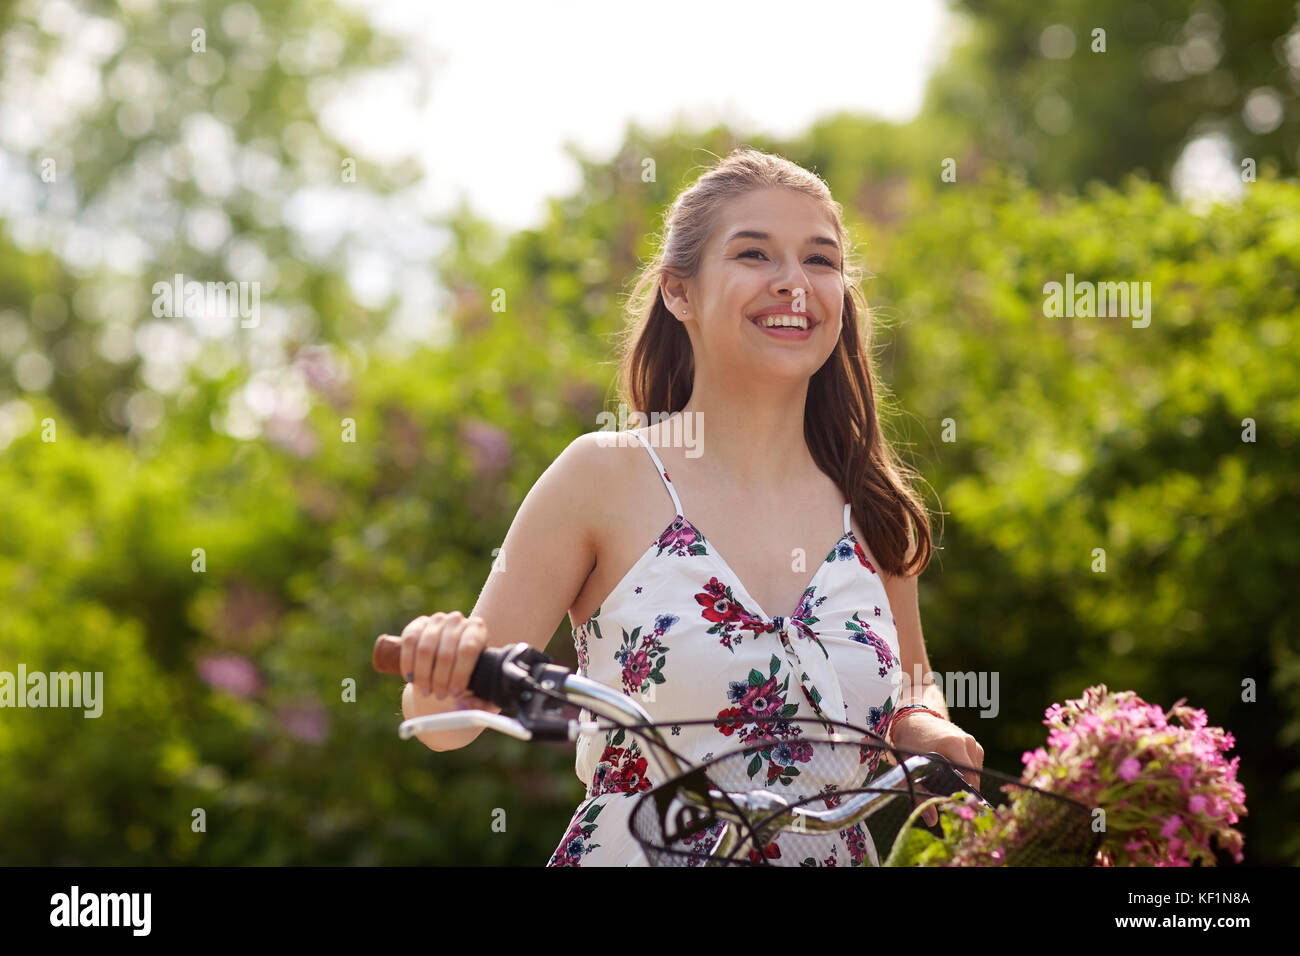 happy woman riding fixie bicycle in summer park Stock Photo